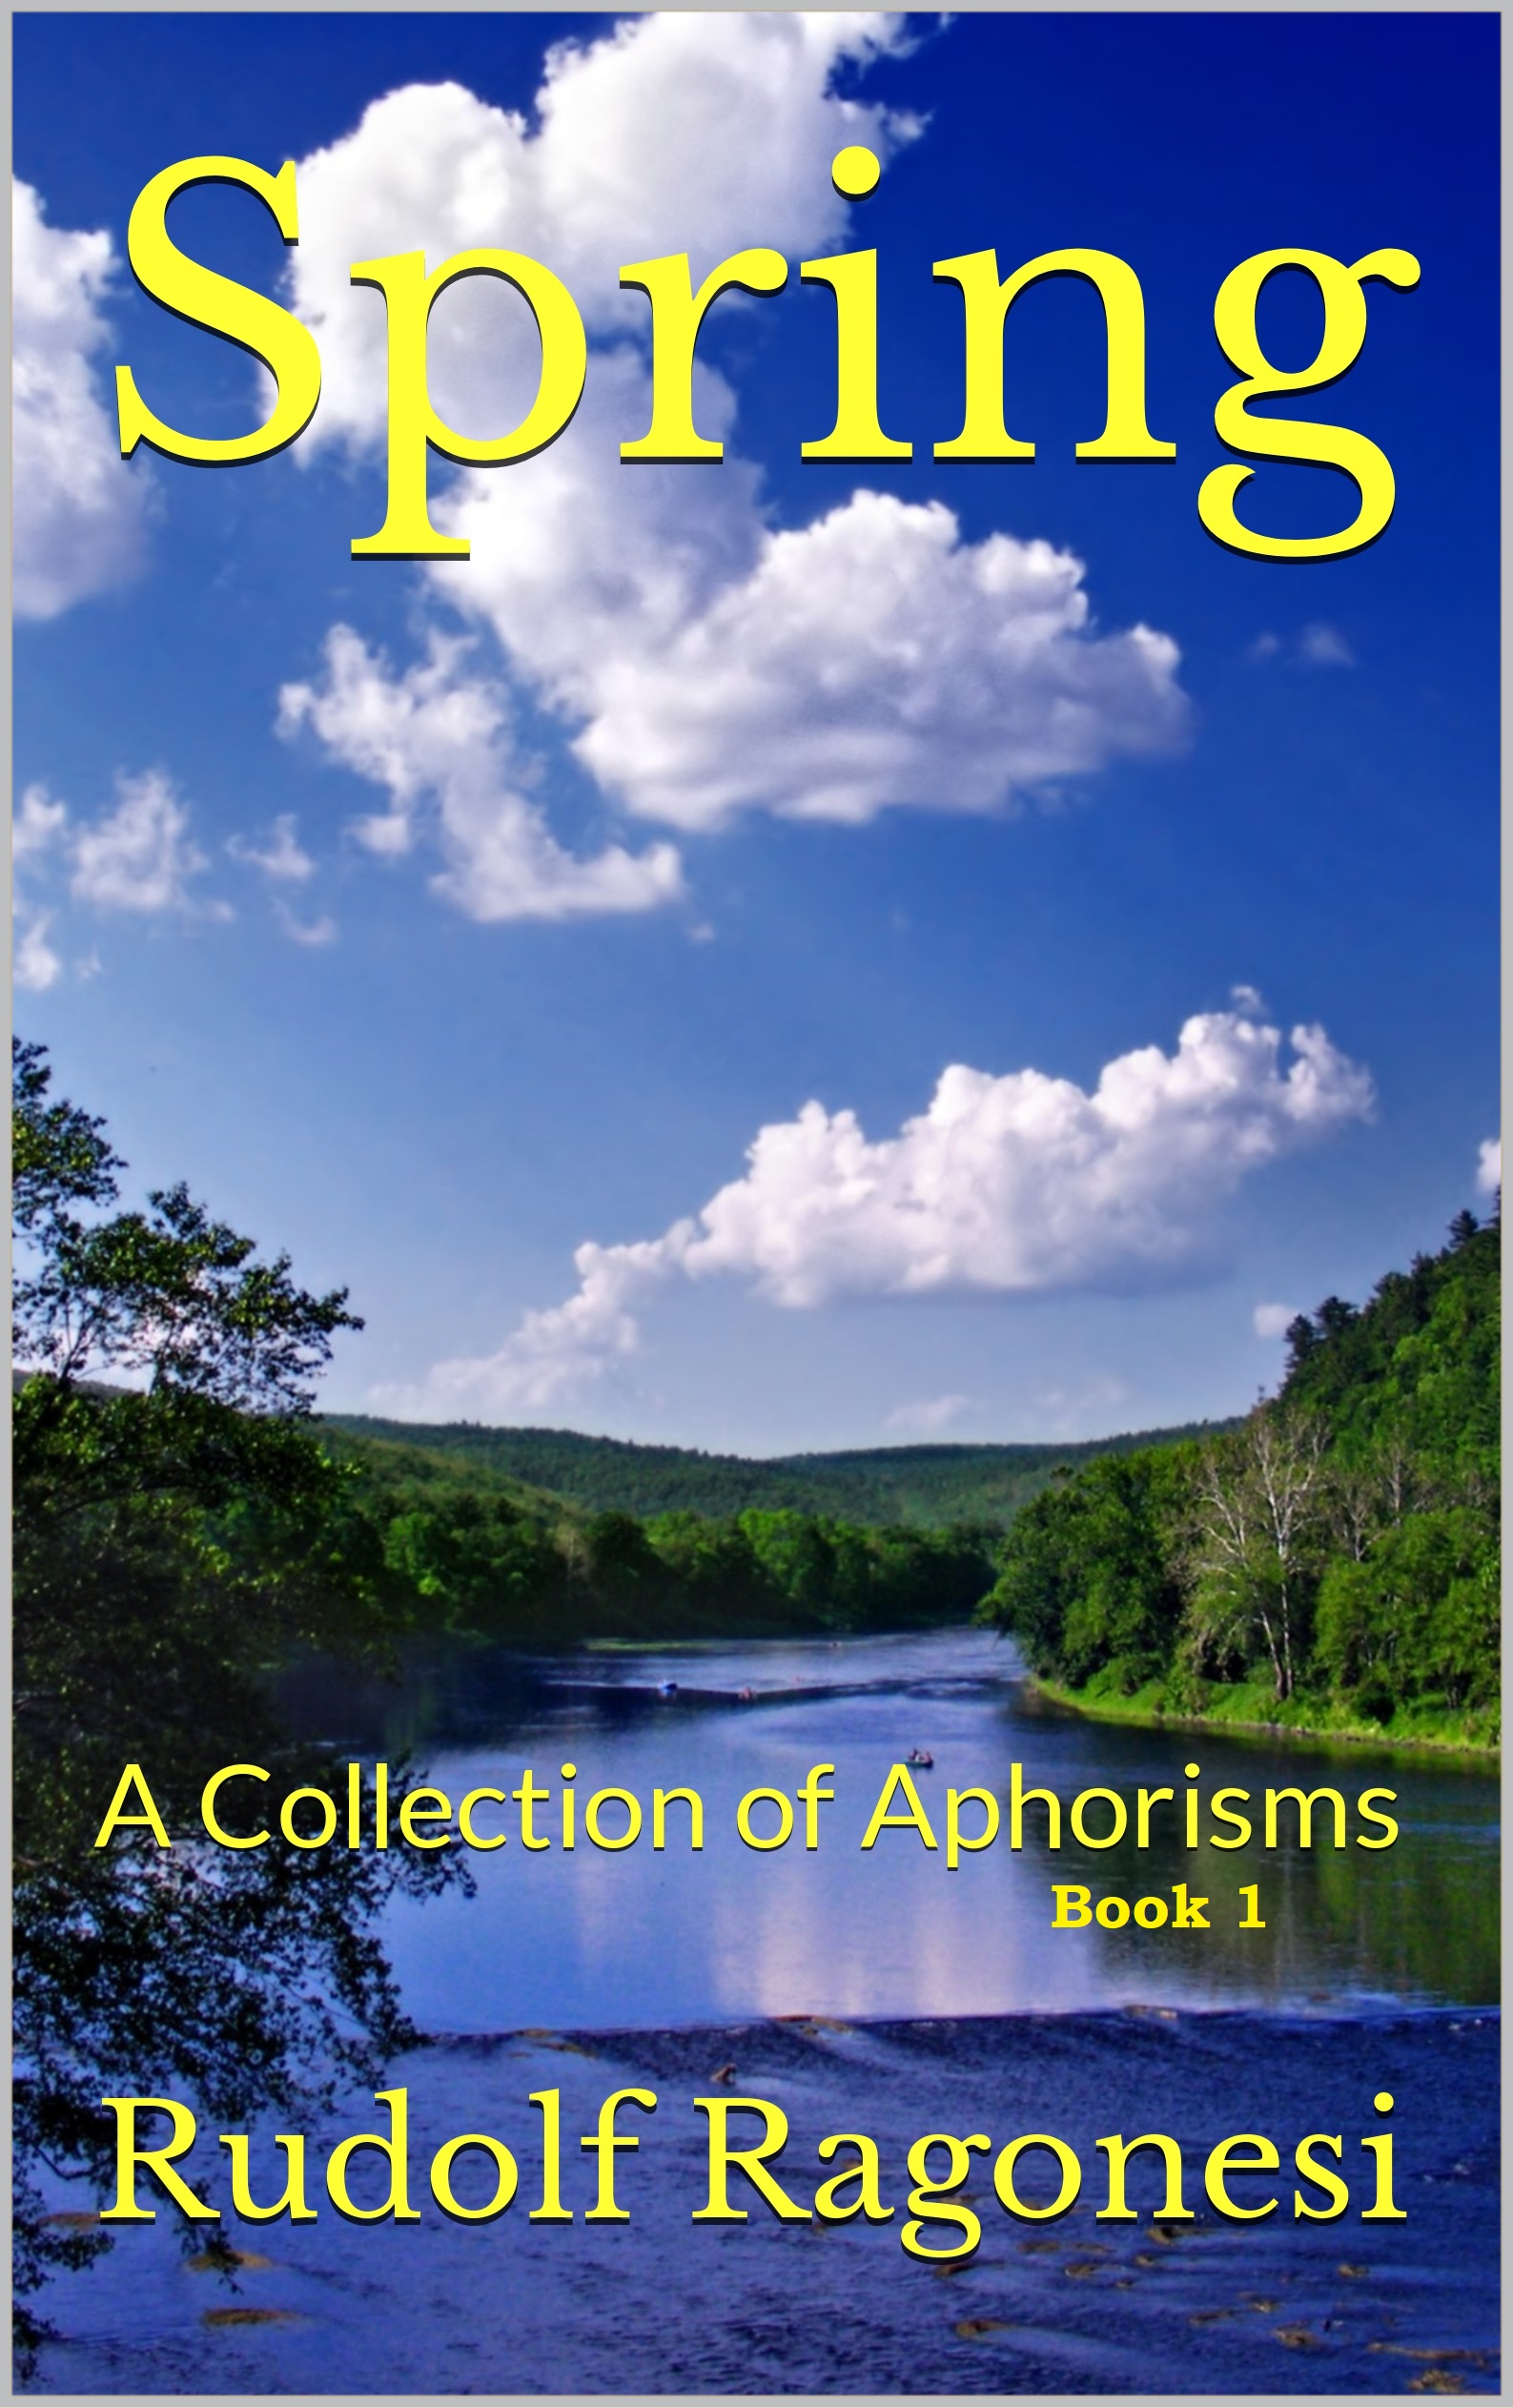 A collection of Aphorisms Spring by Rudolf Ragonese